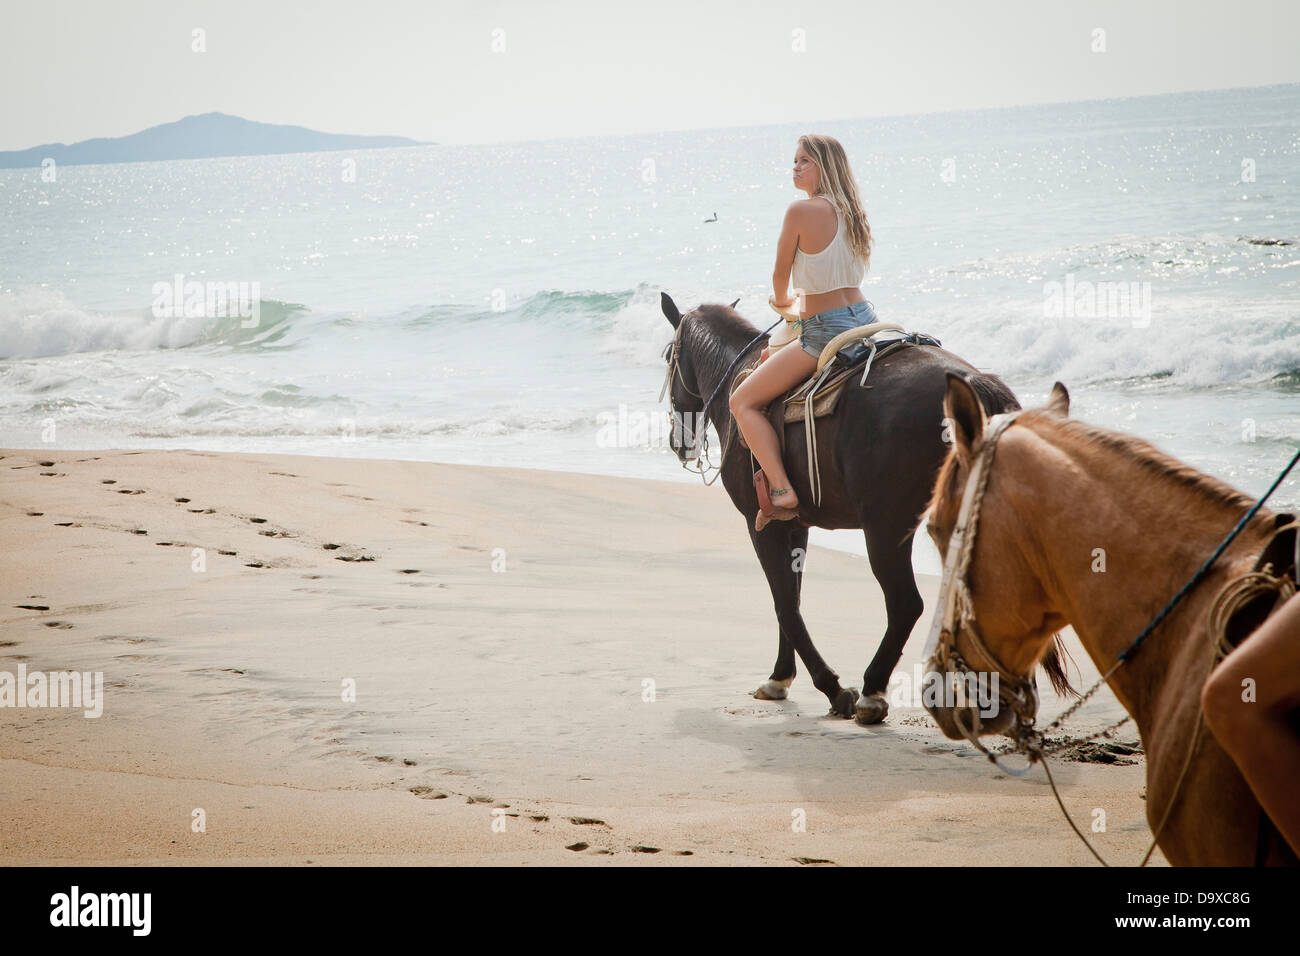 Young woman riding horse on beach Banque D'Images